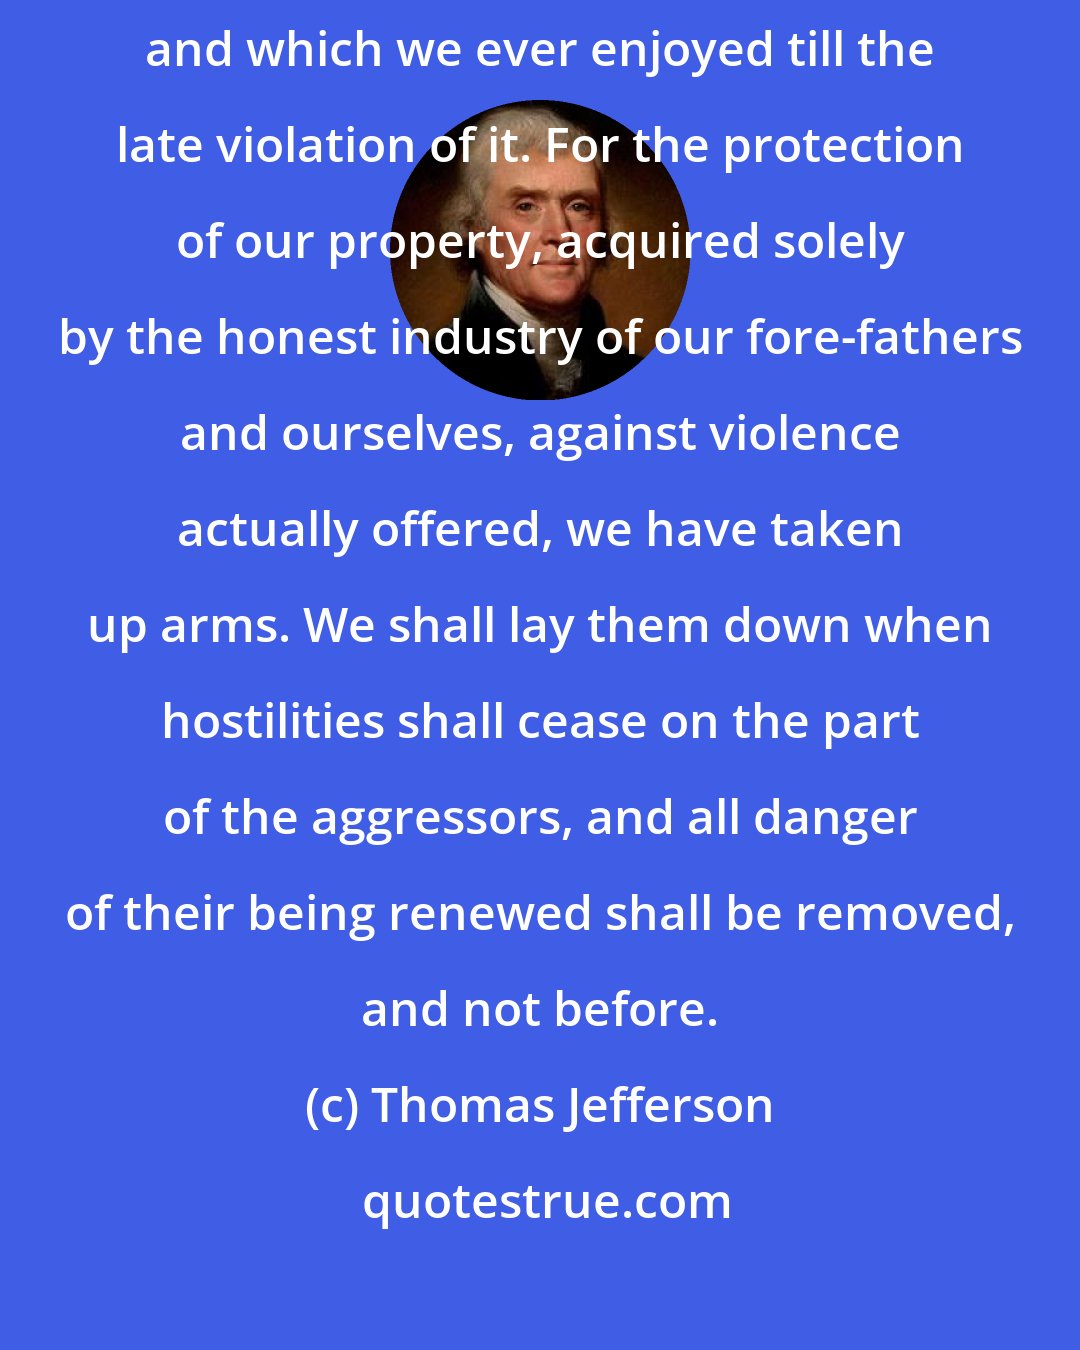 Thomas Jefferson: In our own native land, in defense of the freedom that is our birthright and which we ever enjoyed till the late violation of it. For the protection of our property, acquired solely by the honest industry of our fore-fathers and ourselves, against violence actually offered, we have taken up arms. We shall lay them down when hostilities shall cease on the part of the aggressors, and all danger of their being renewed shall be removed, and not before.